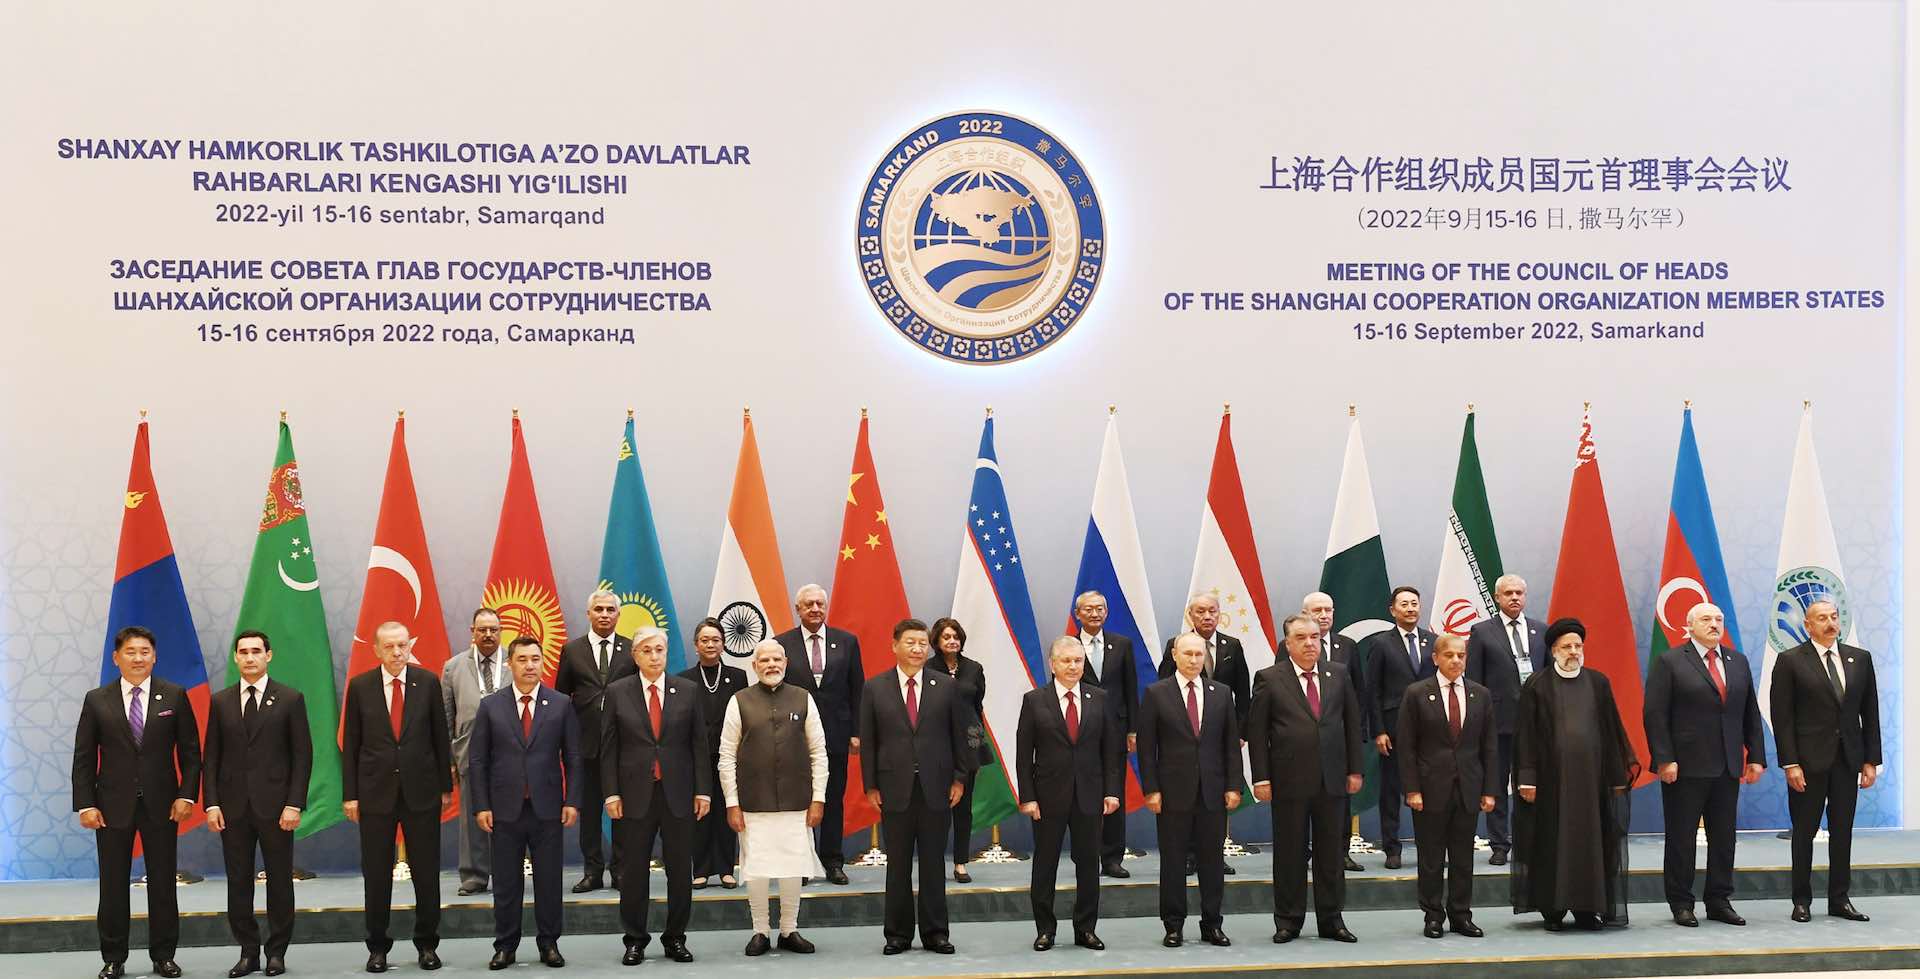 PM Modi calls for diversified, resilient supply chains at SCO summit